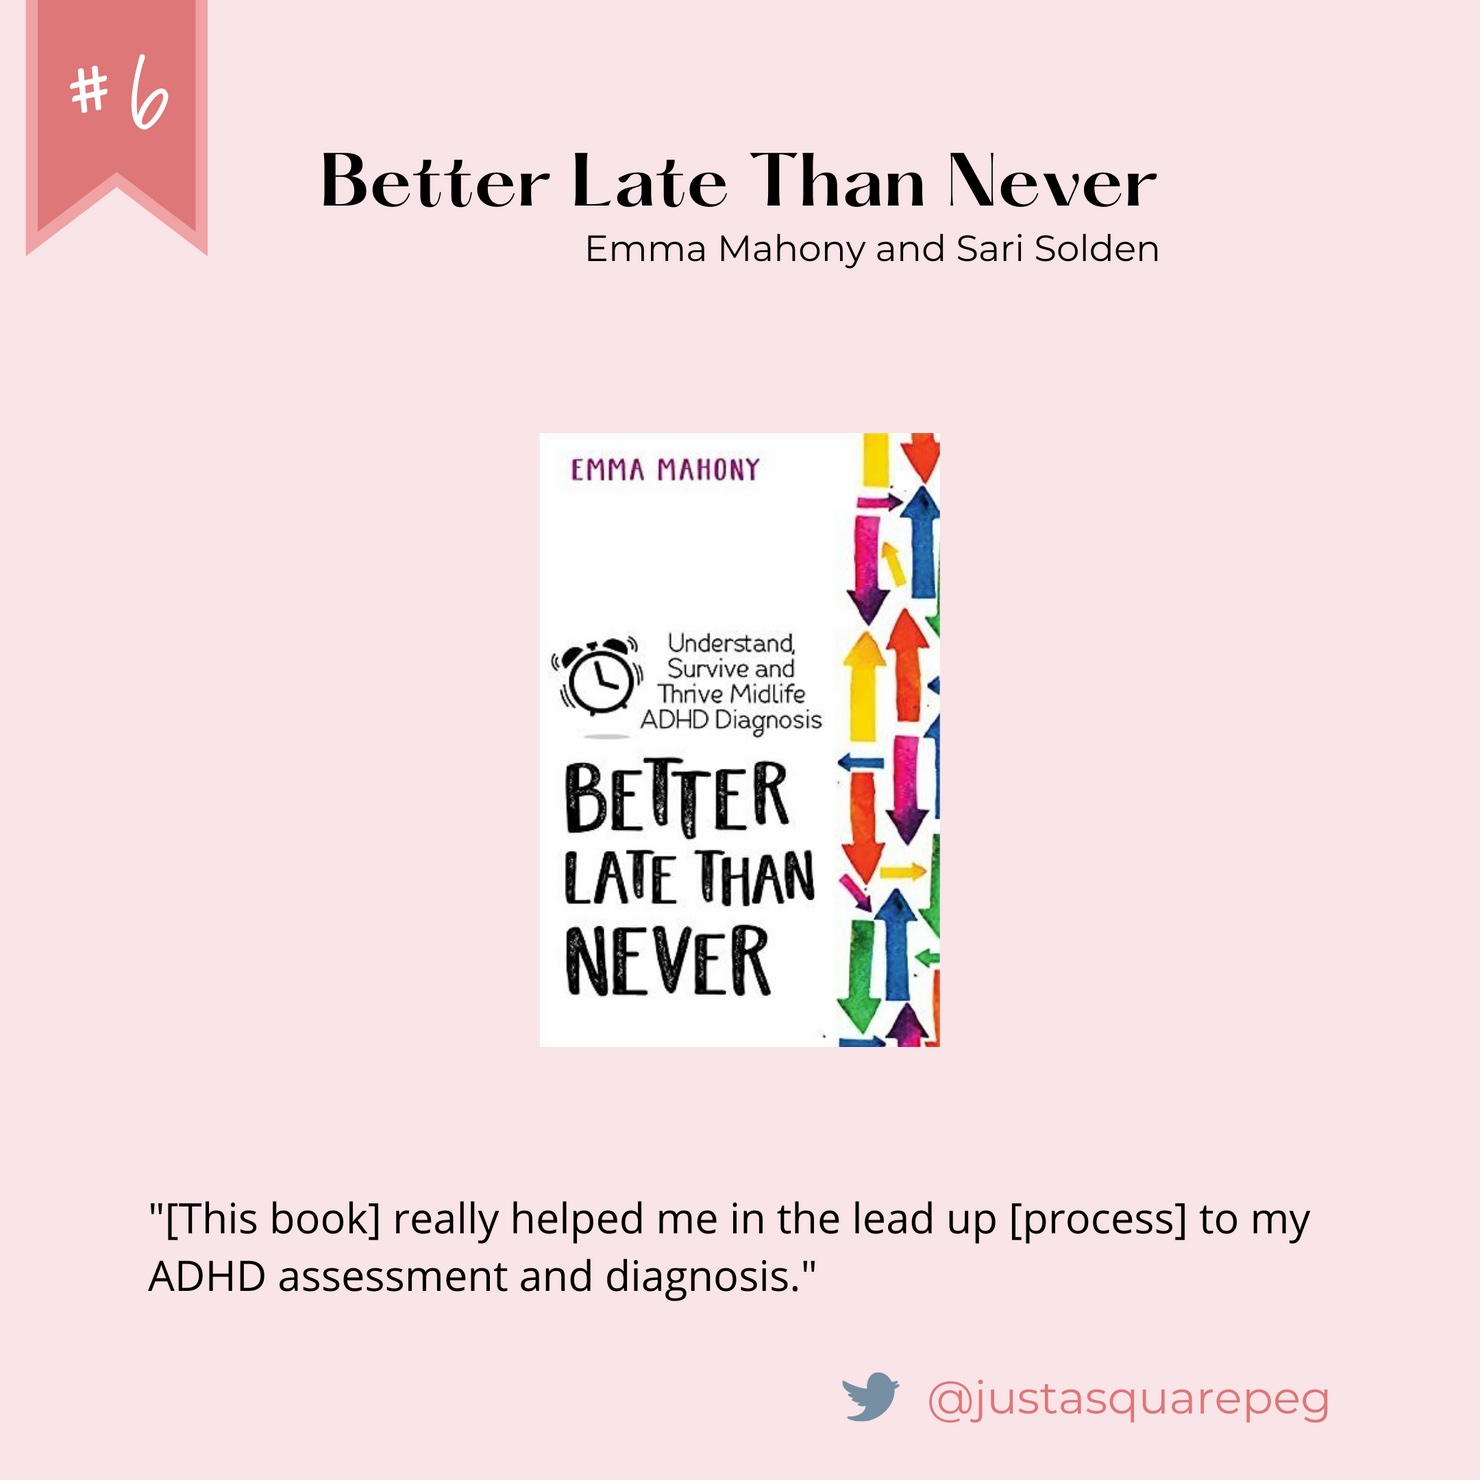 Number 6: Better Late Than Never. Written by Emma Mahony and Sari Solden. Quote from @justasquarepeg on twitter: "[This book] really helped me in the lead up [process] to my ADHD assessment and diagnosis."